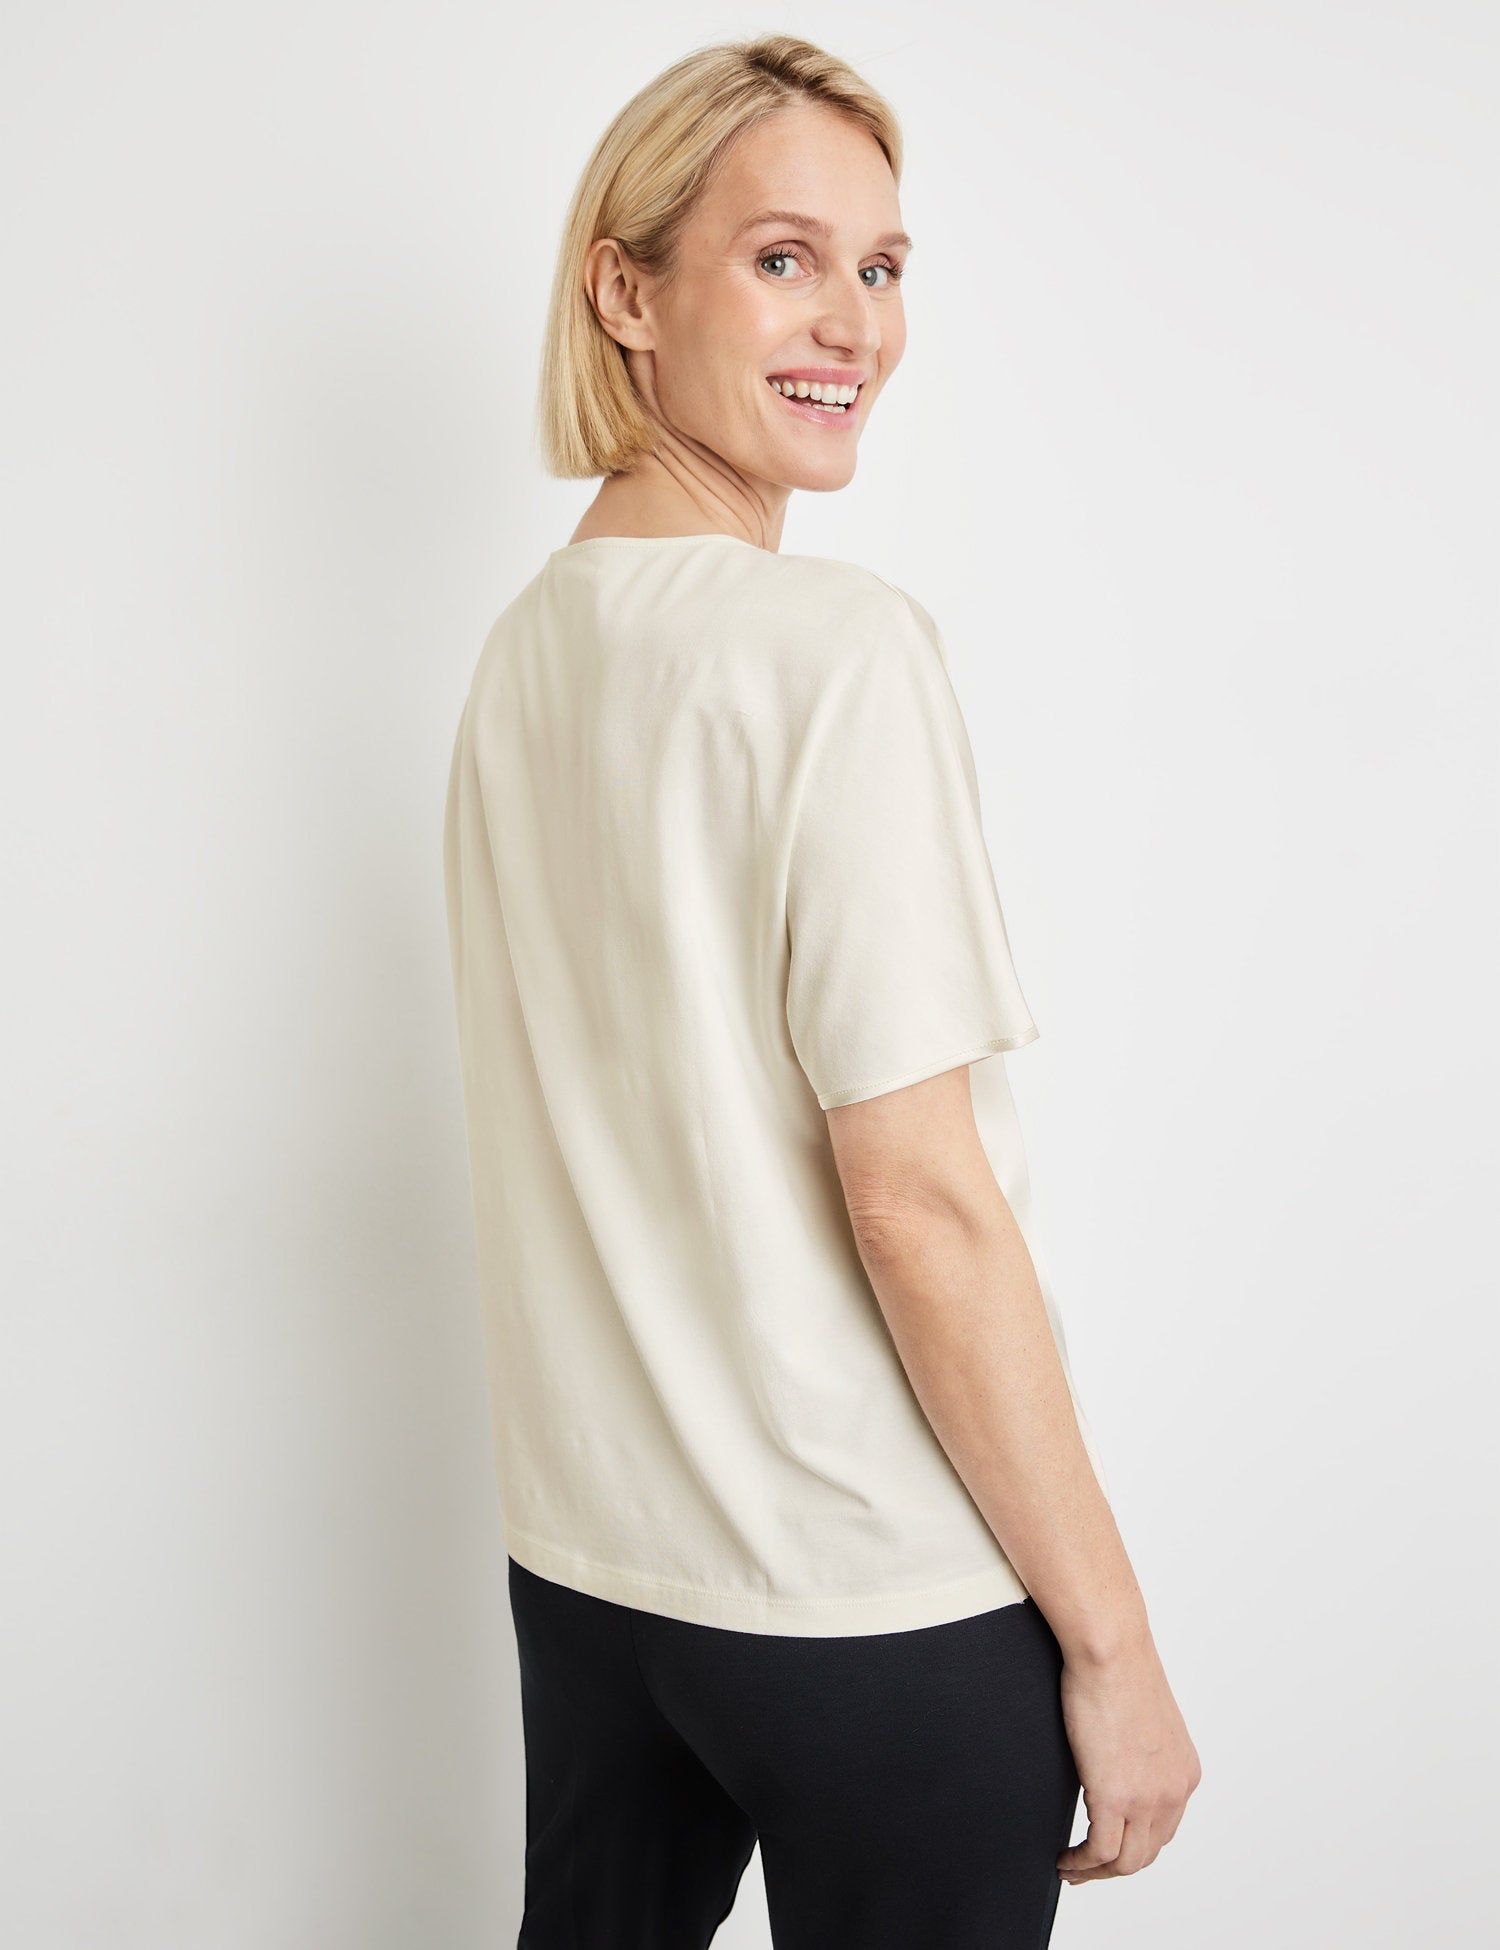 Flowing Blouse Top With Fabric Panelling_977047-35033_90118_06